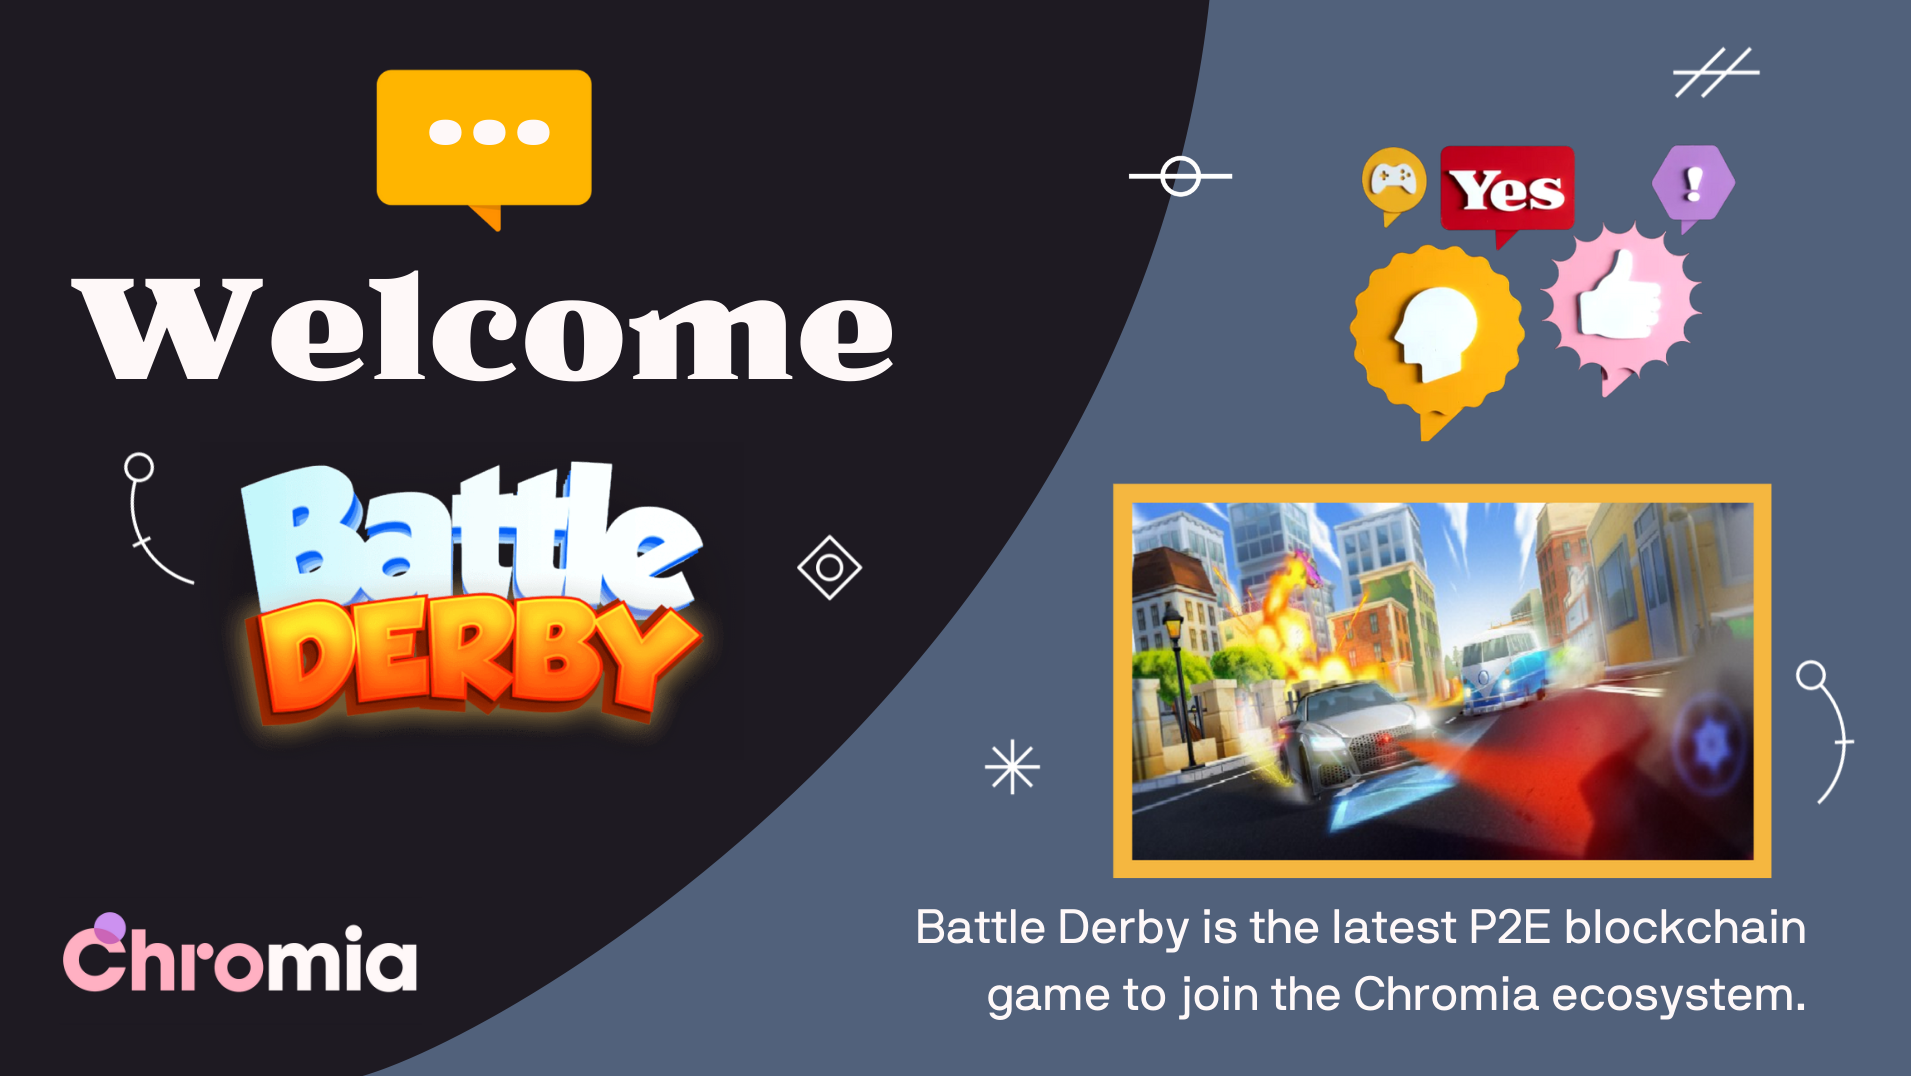 Battle Derby – the latest P2E game on Chromia to raise $1.8 million in private funding